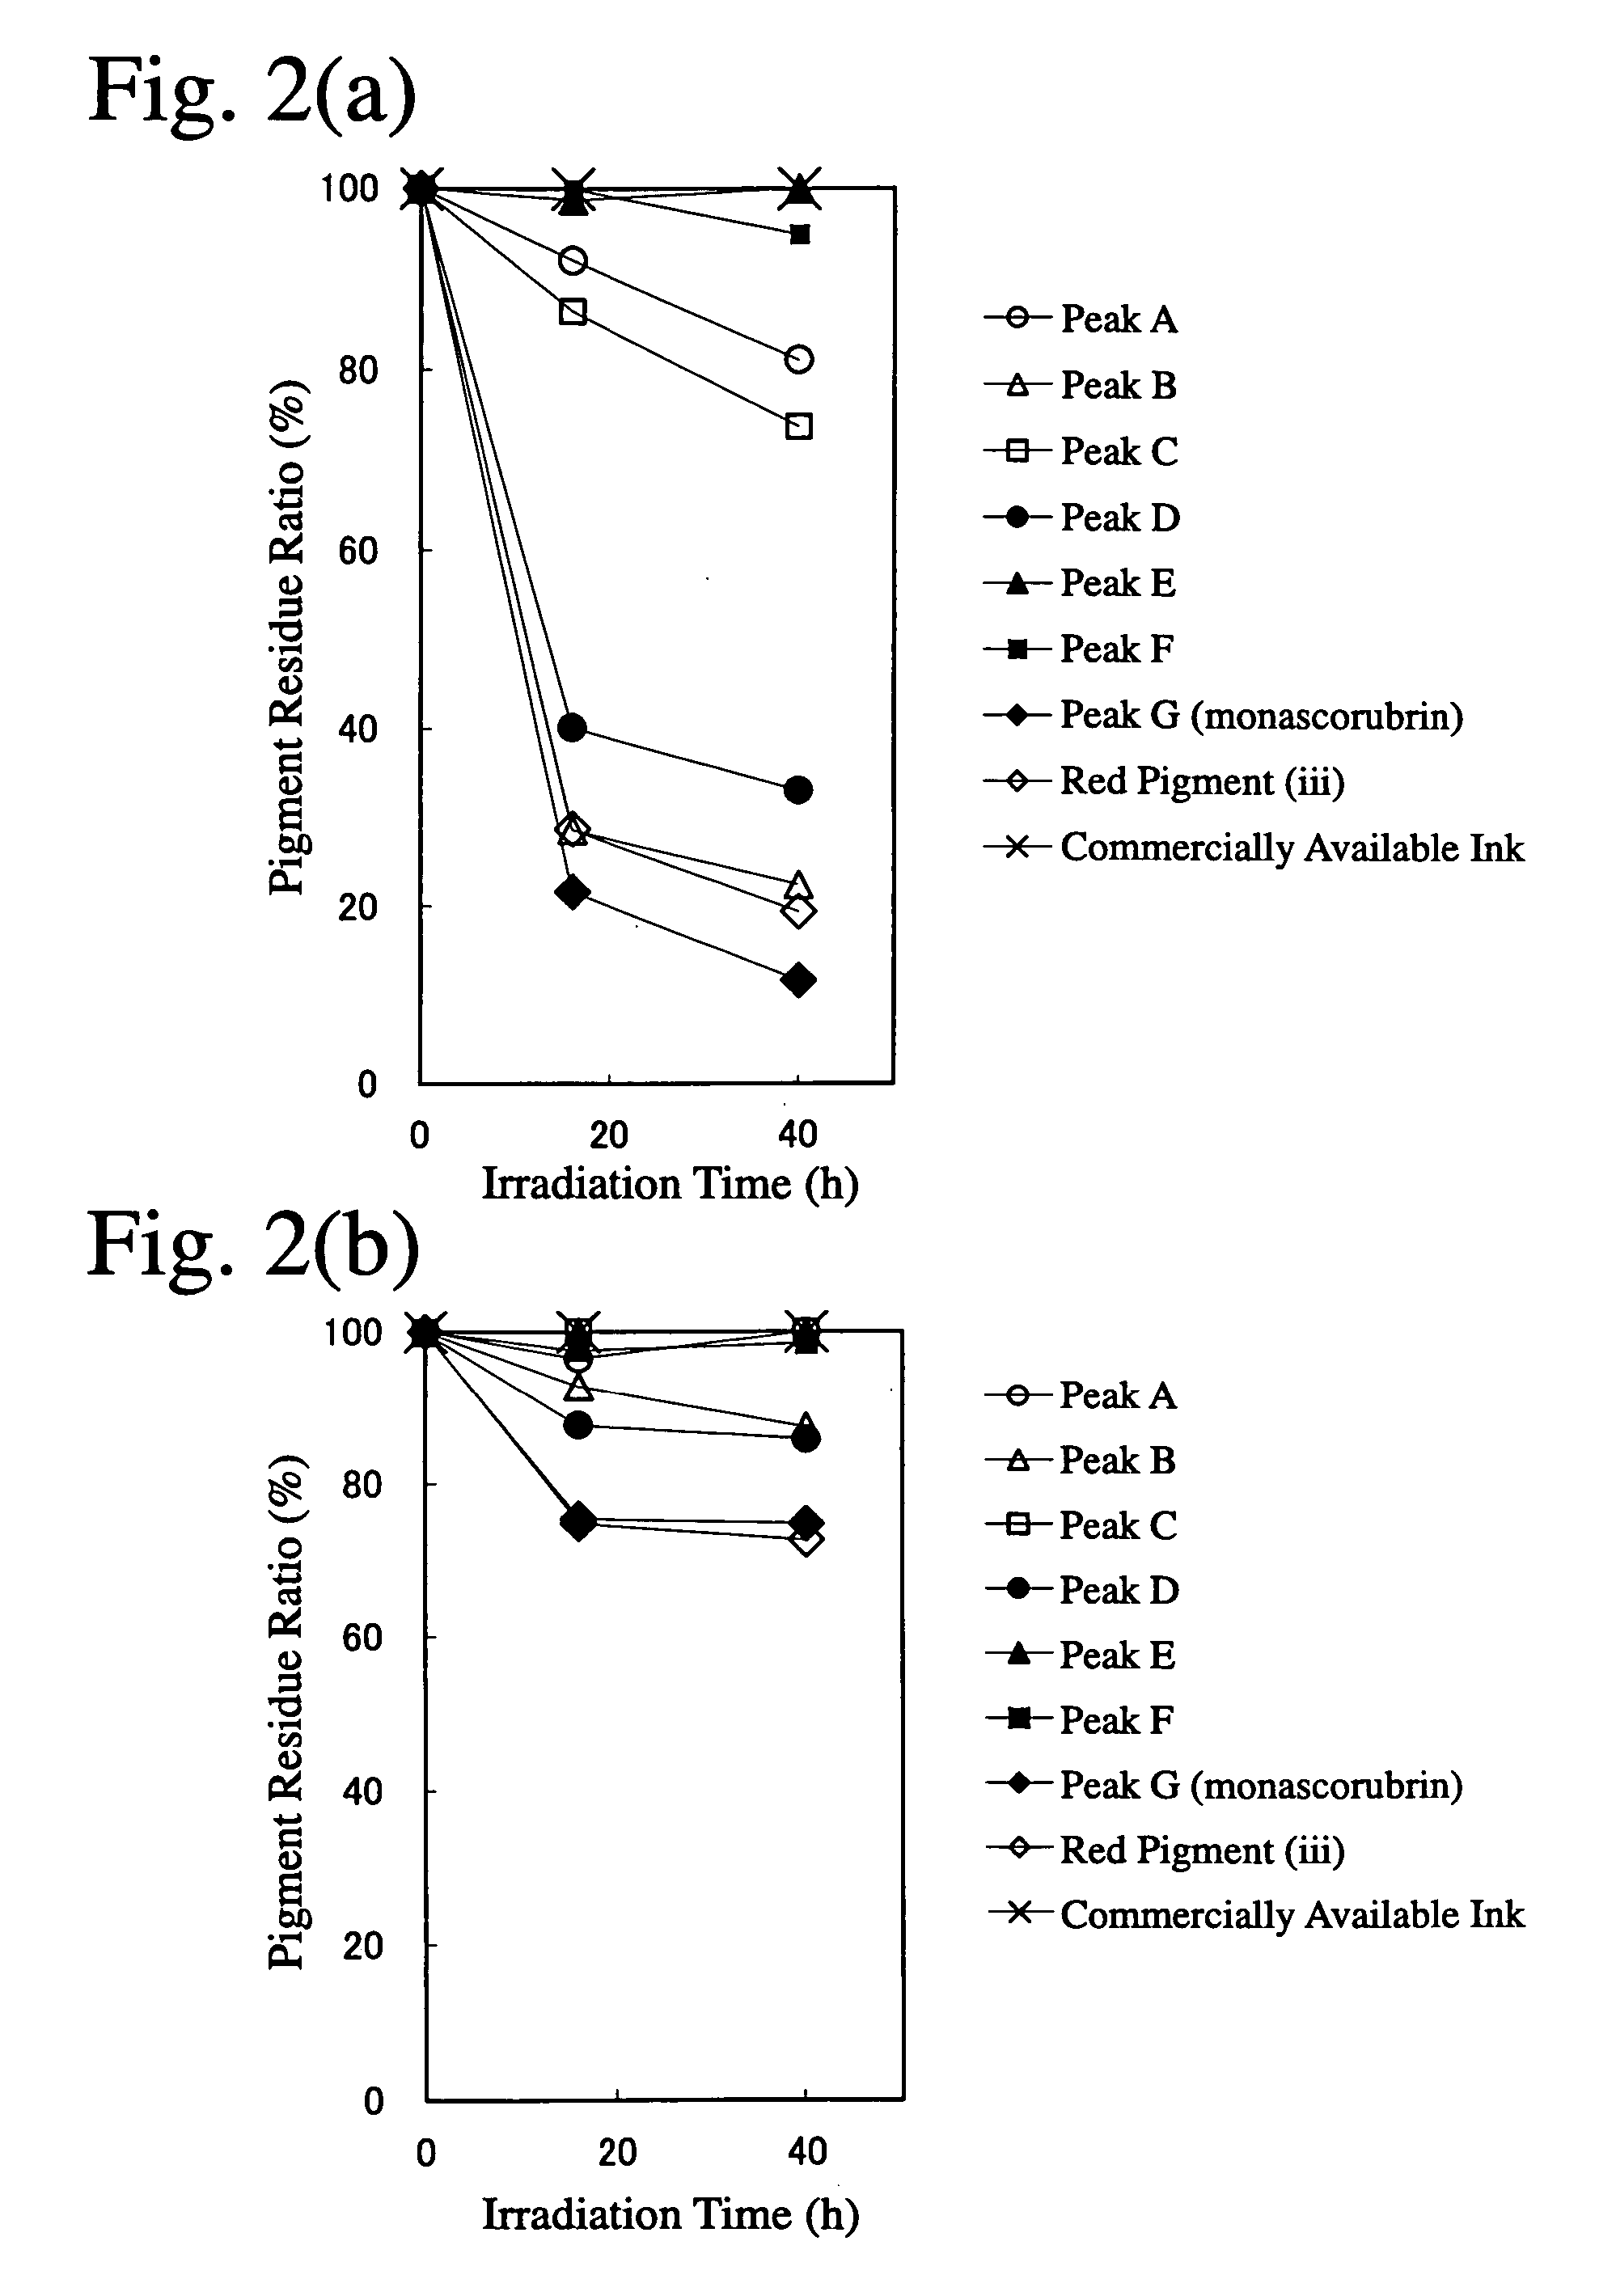 Decoloring ink for ink jet printing and ink jet printing method using it